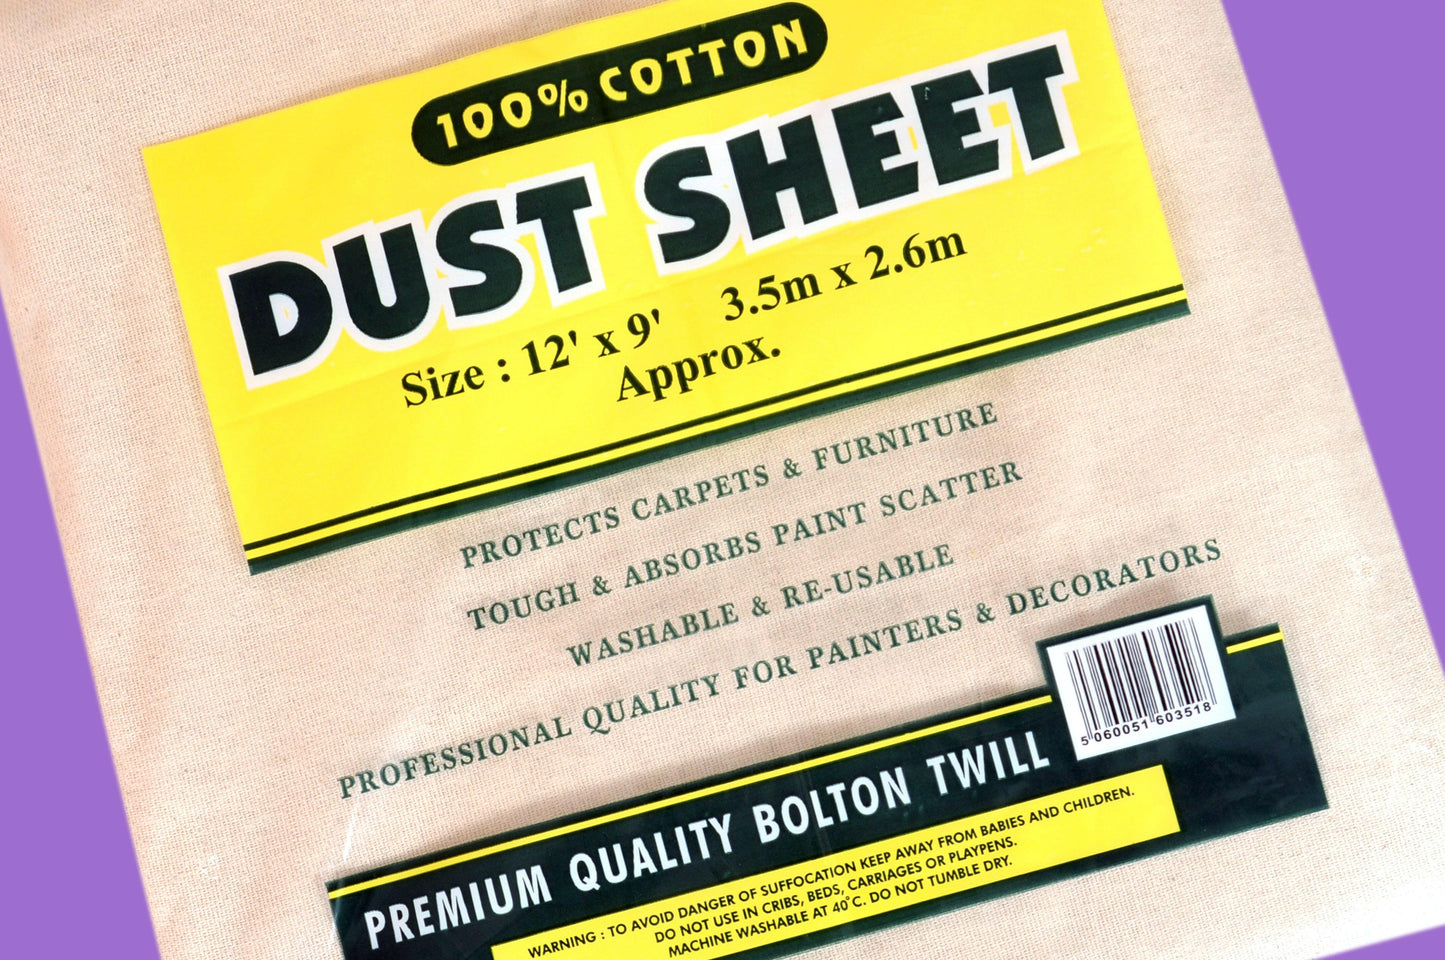 Extra Heavy Duty Dust Sheet. Drop Cloth. 2.5Kg Cotton. Large Size. Bolton Twill - 12' x 9'